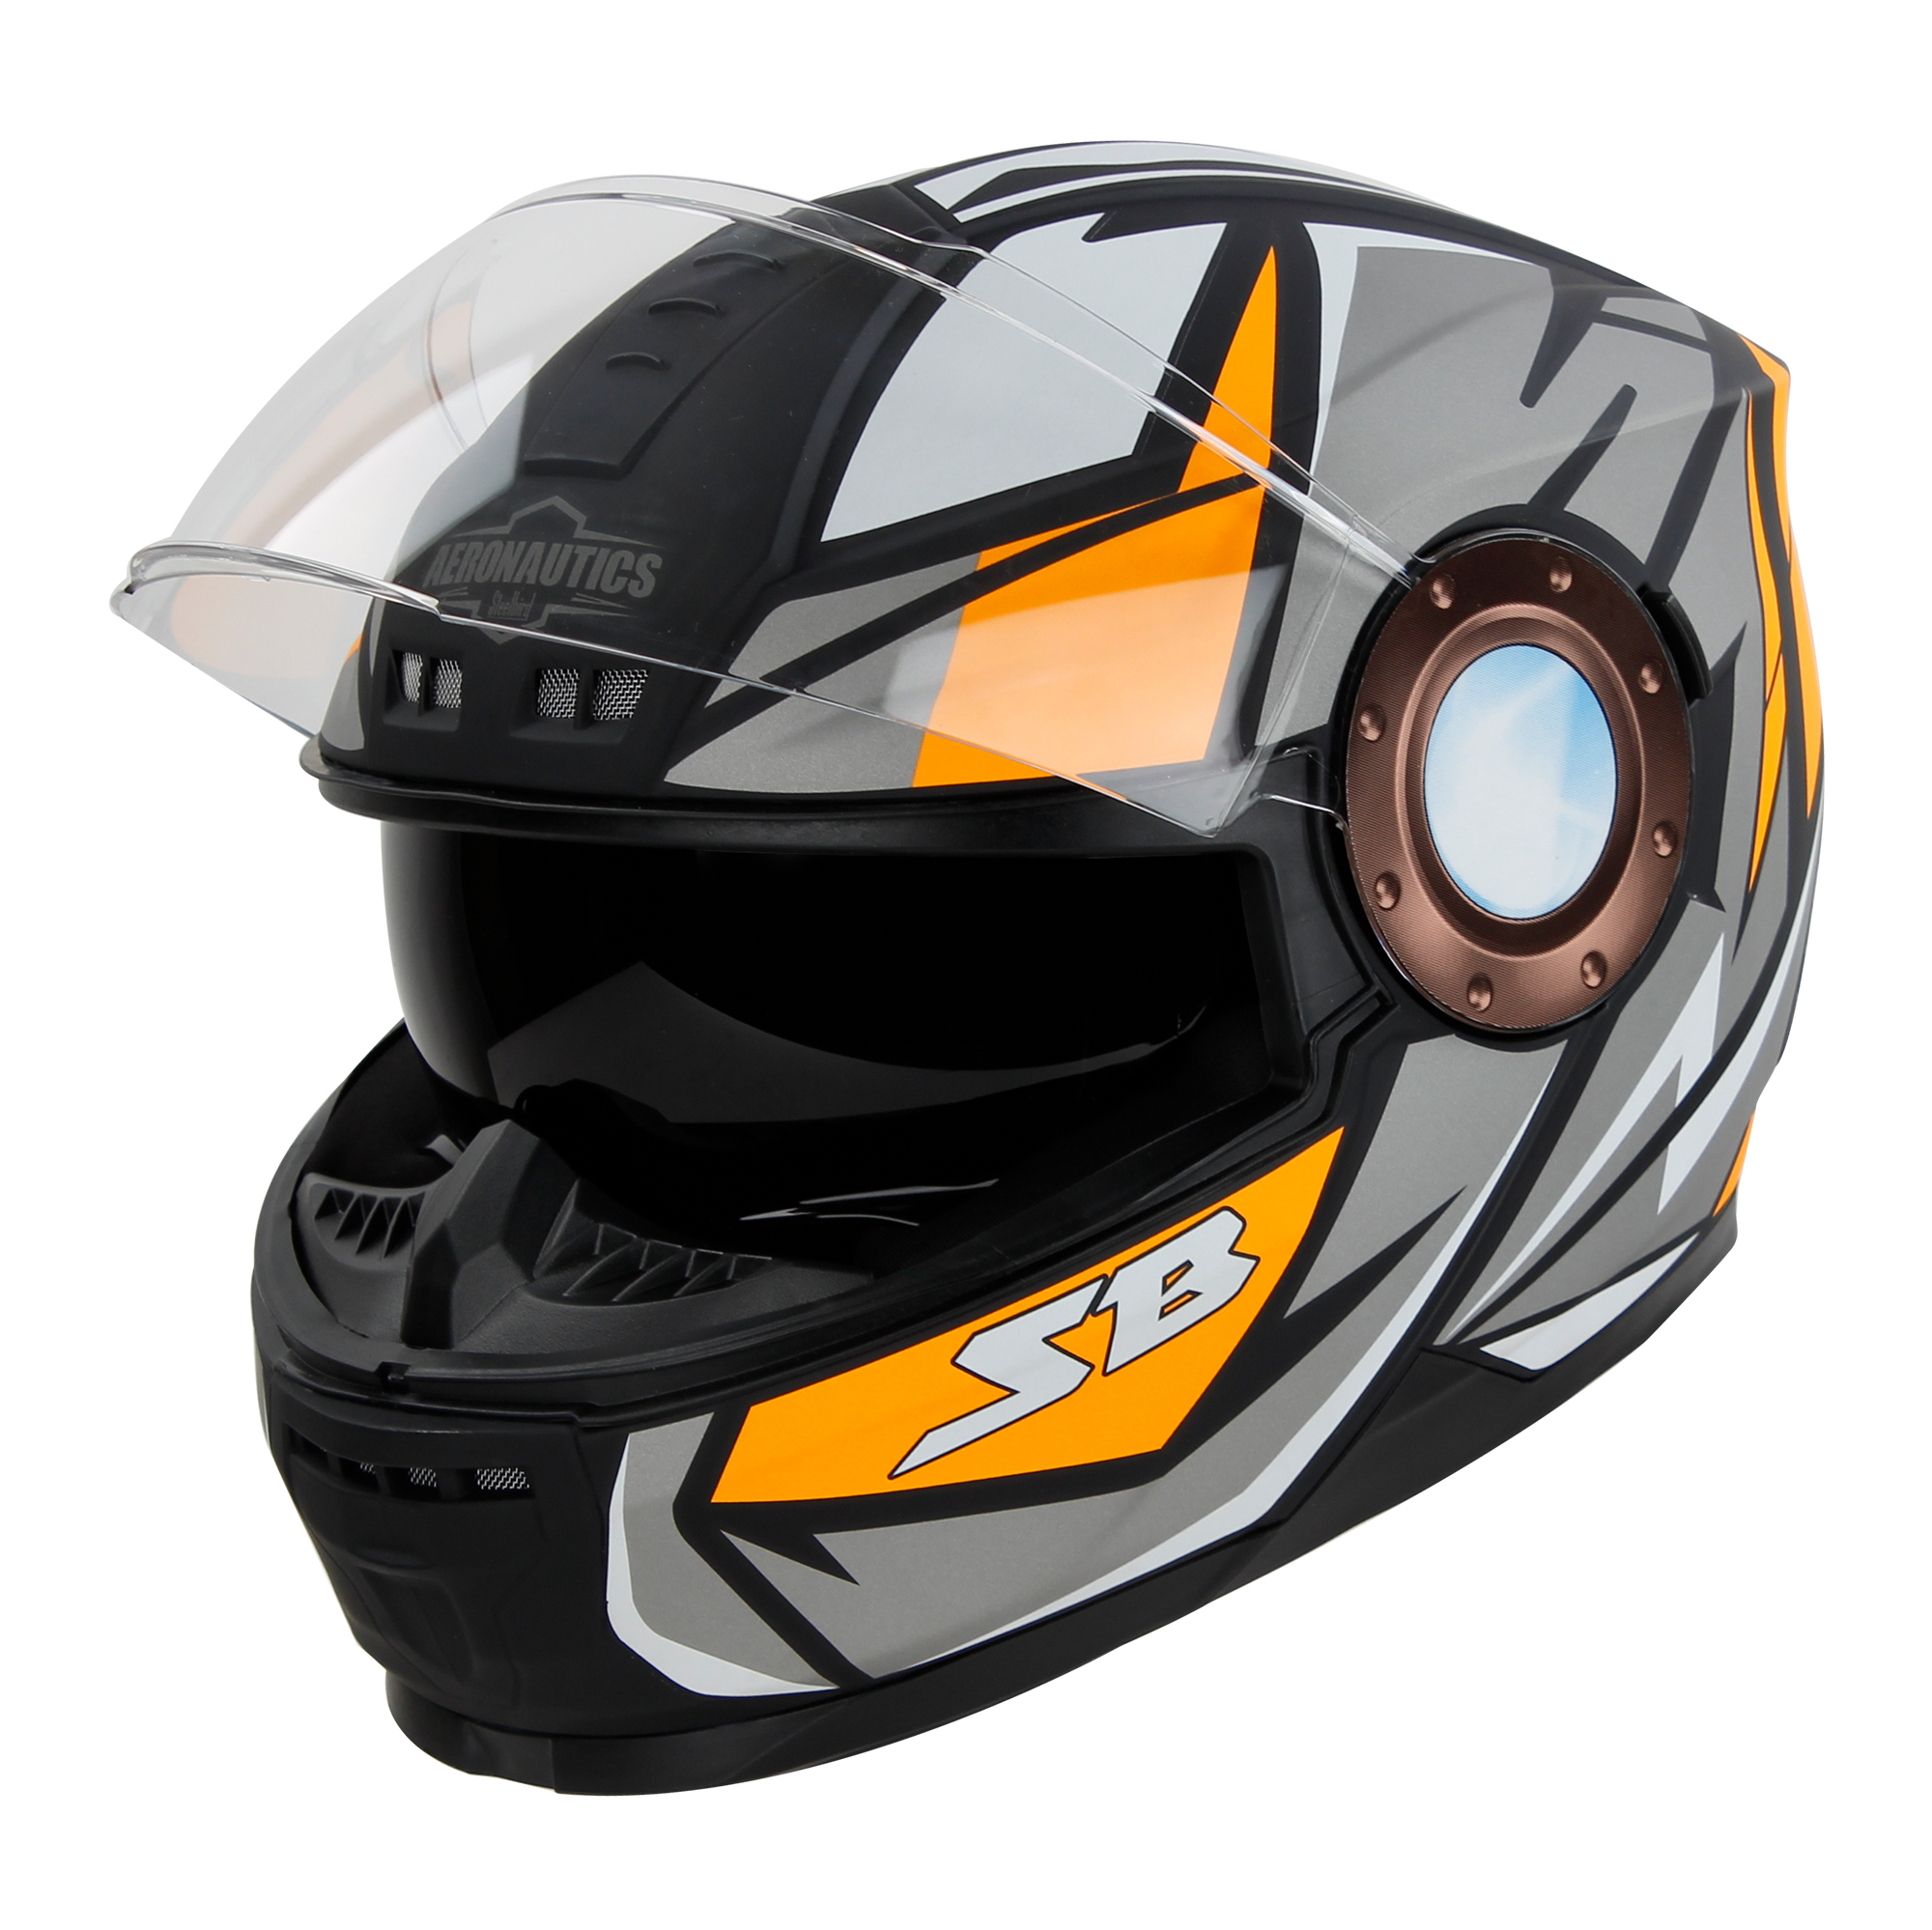 Steelbird SBH-40 Decode ISI Certified Full Face Graphic Helmet For Men And Women With Inner Sun Shield (Glossy Black Orange)